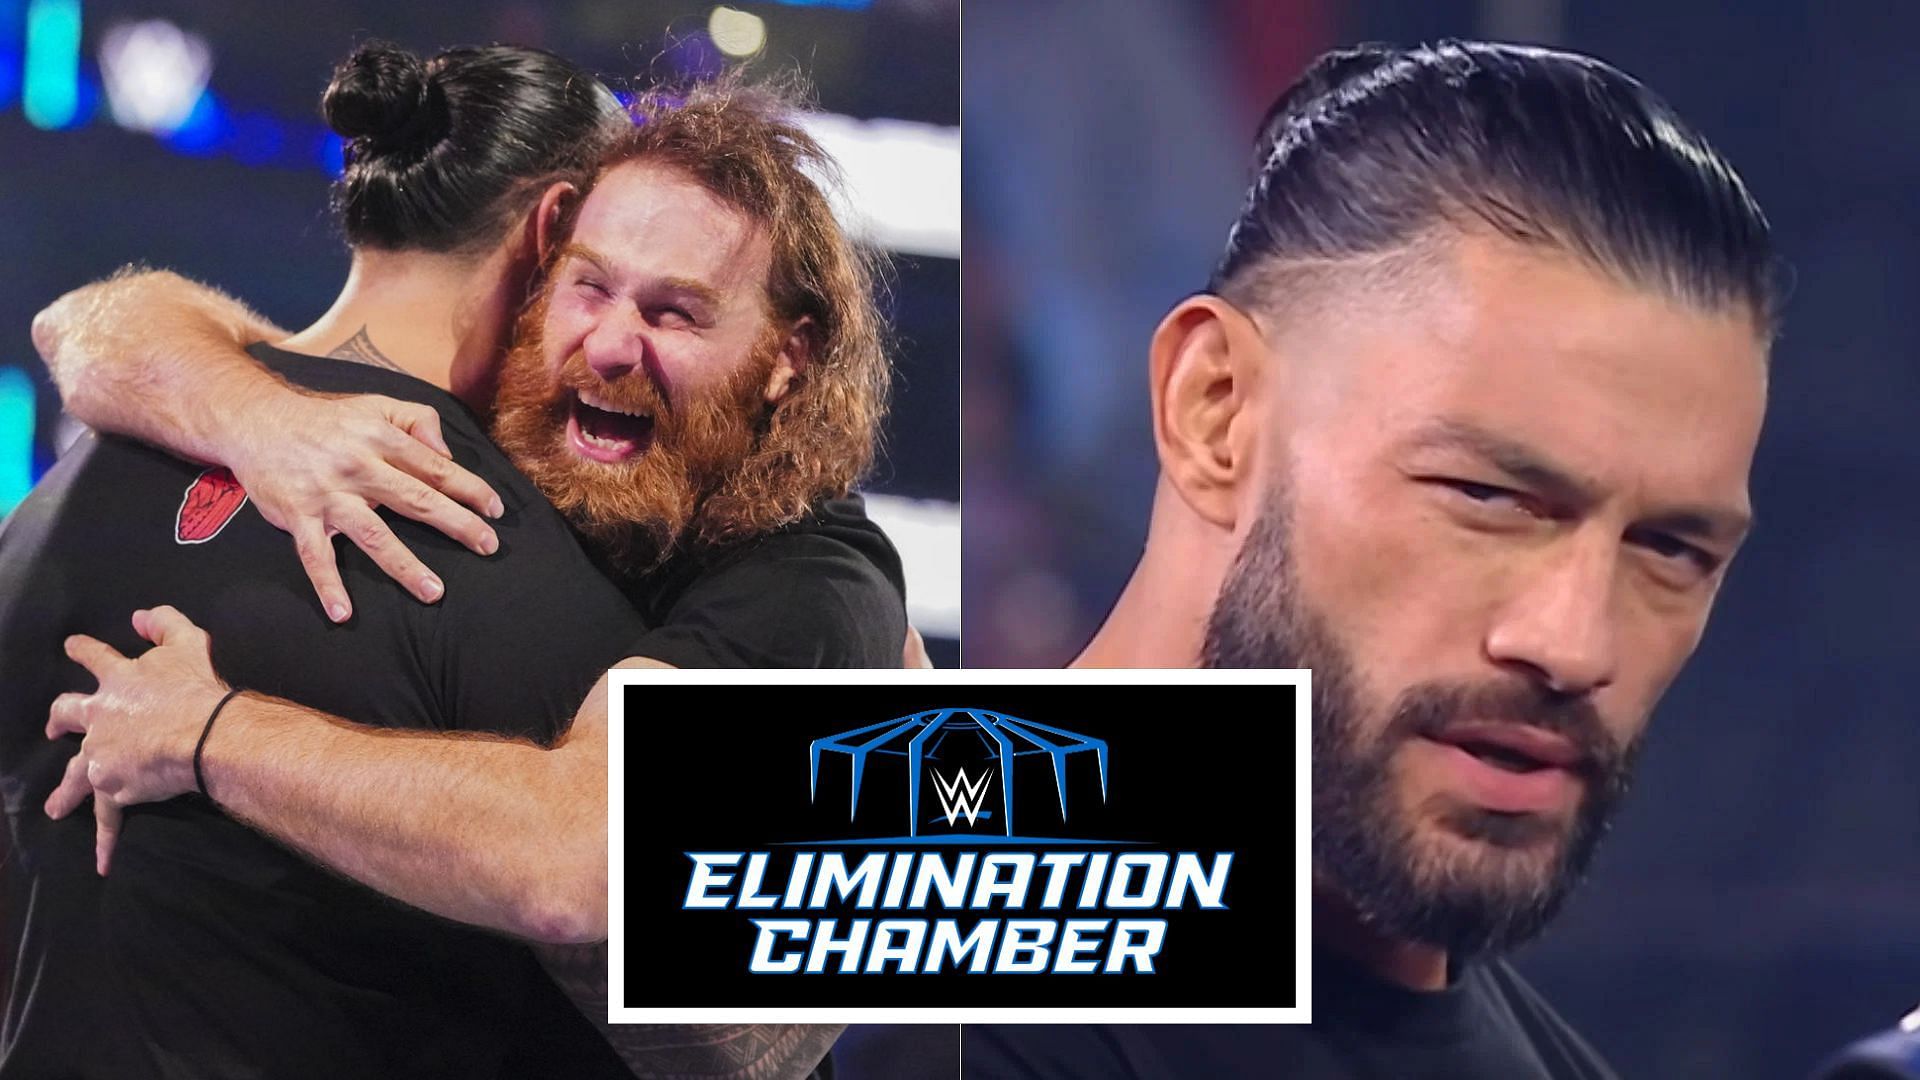 Roman Reigns recently welcomed Sami Zayn into The Bloodline.